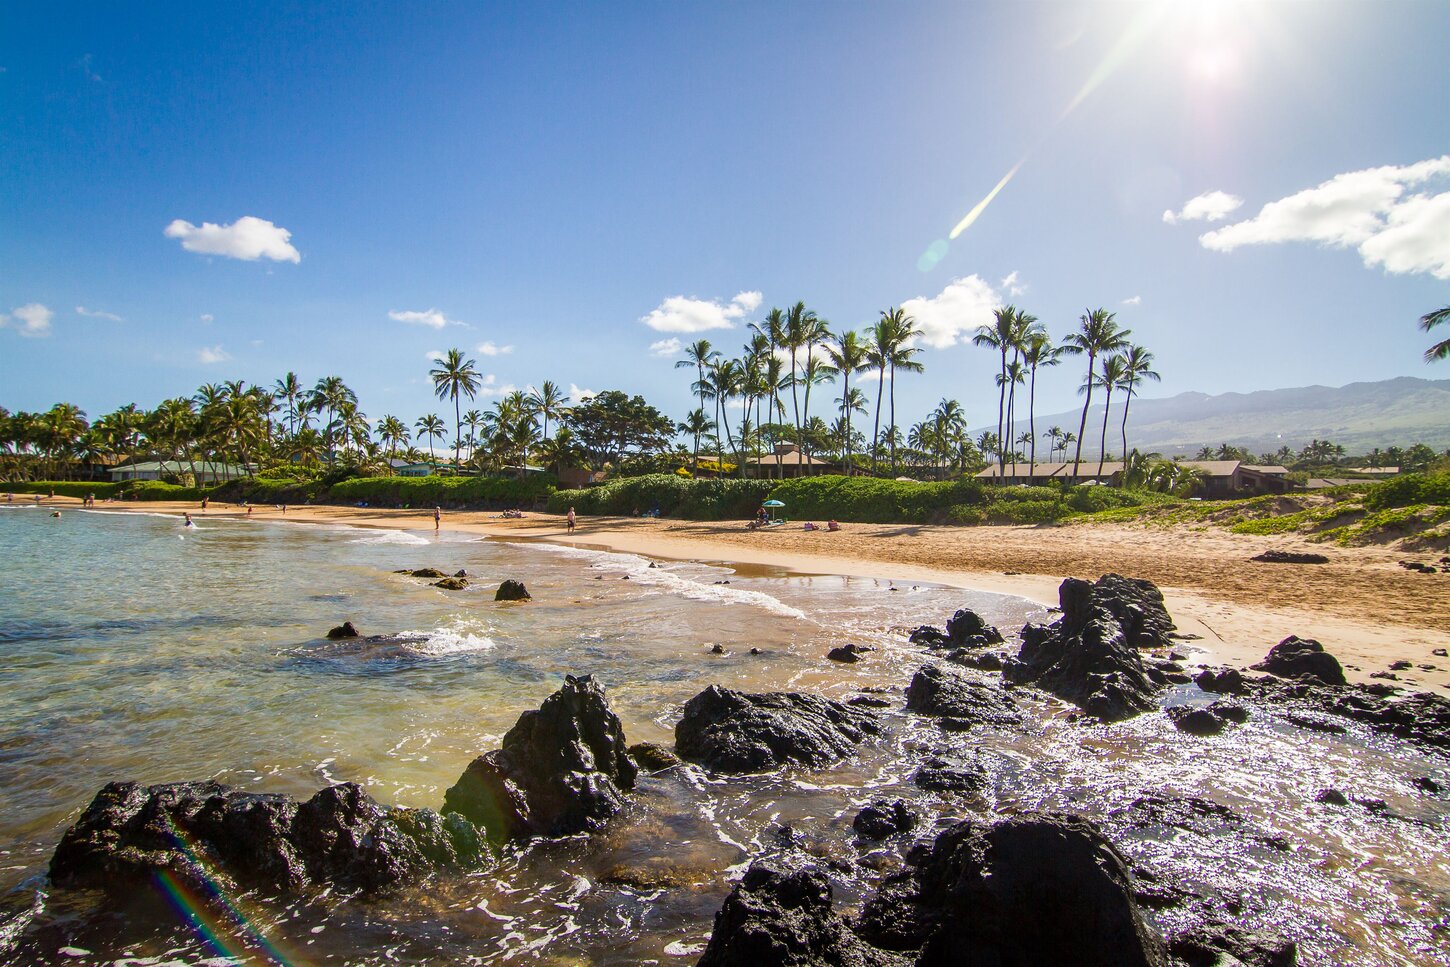 The lava outcroppings are excellent for tidepooling, turtle spotting, and snorkeling.